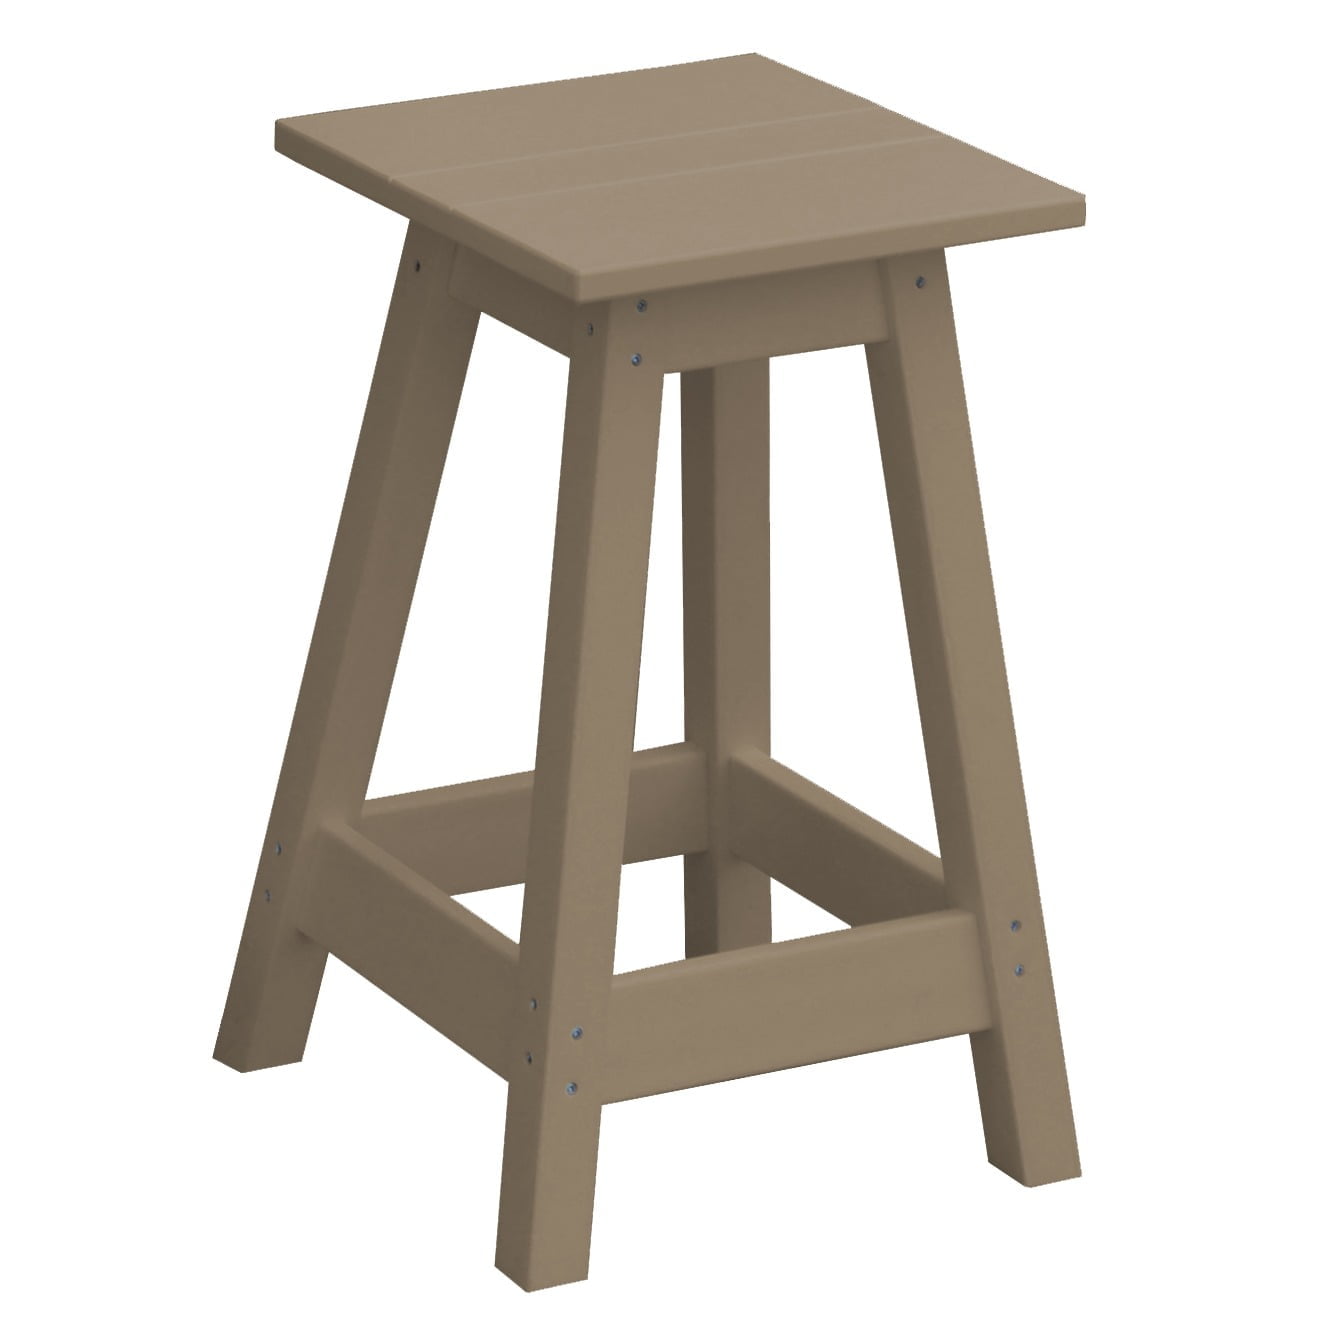 A&L Furniture Poly Lumber Square Bistro Stool